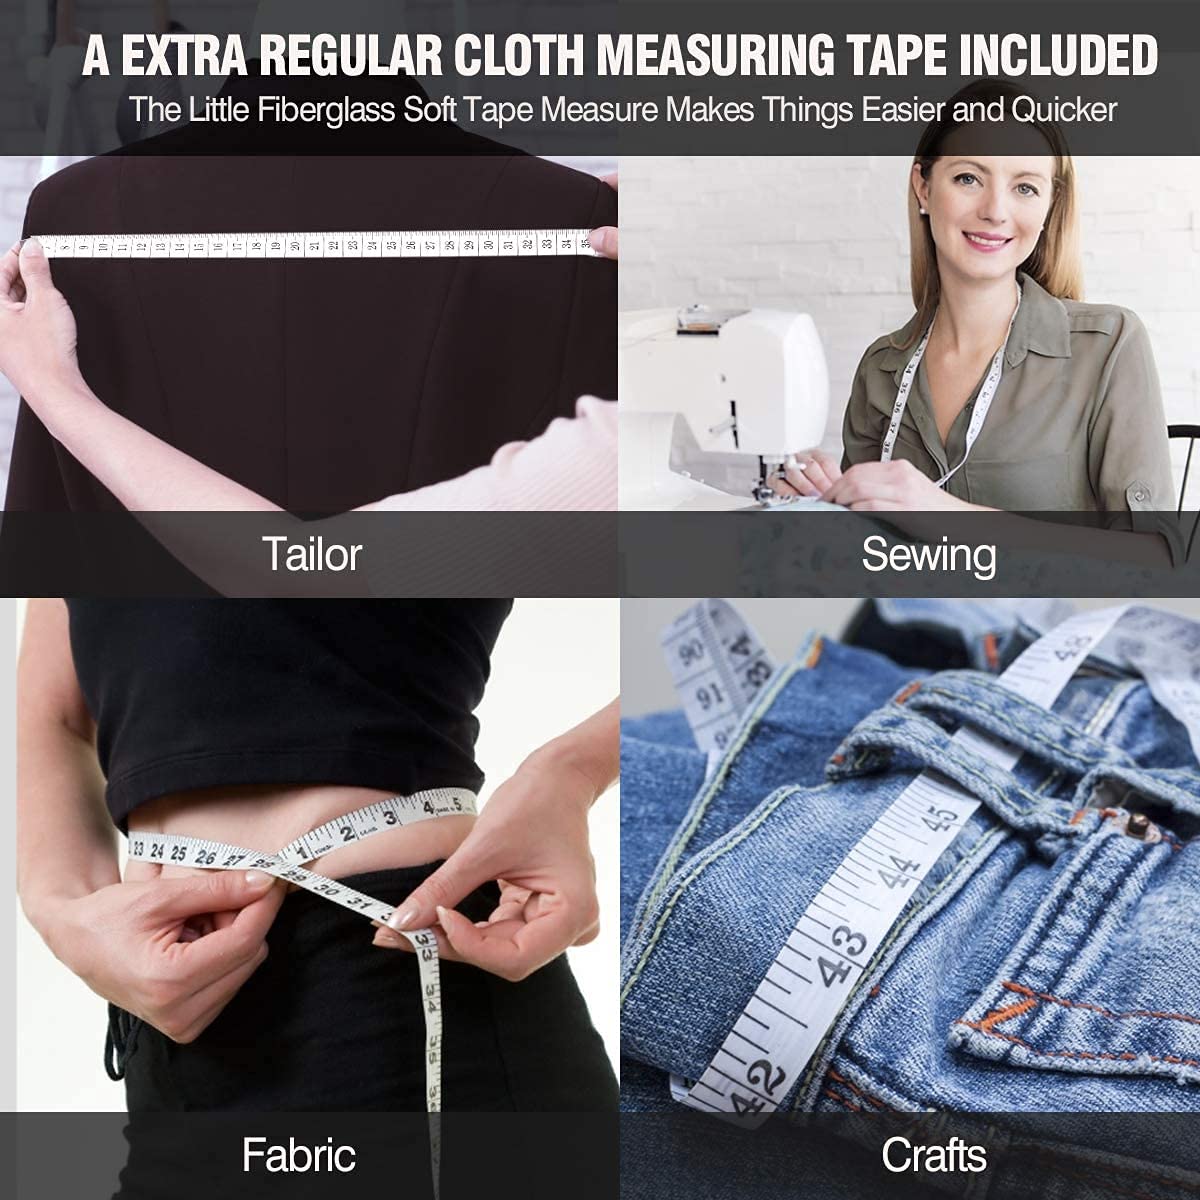 Automatic Telescopic Tape Measure, Body Measure Tape 60 inch (150cm), Self-Tightening Retractable Measuring Tape for Body Accurate Way to Track